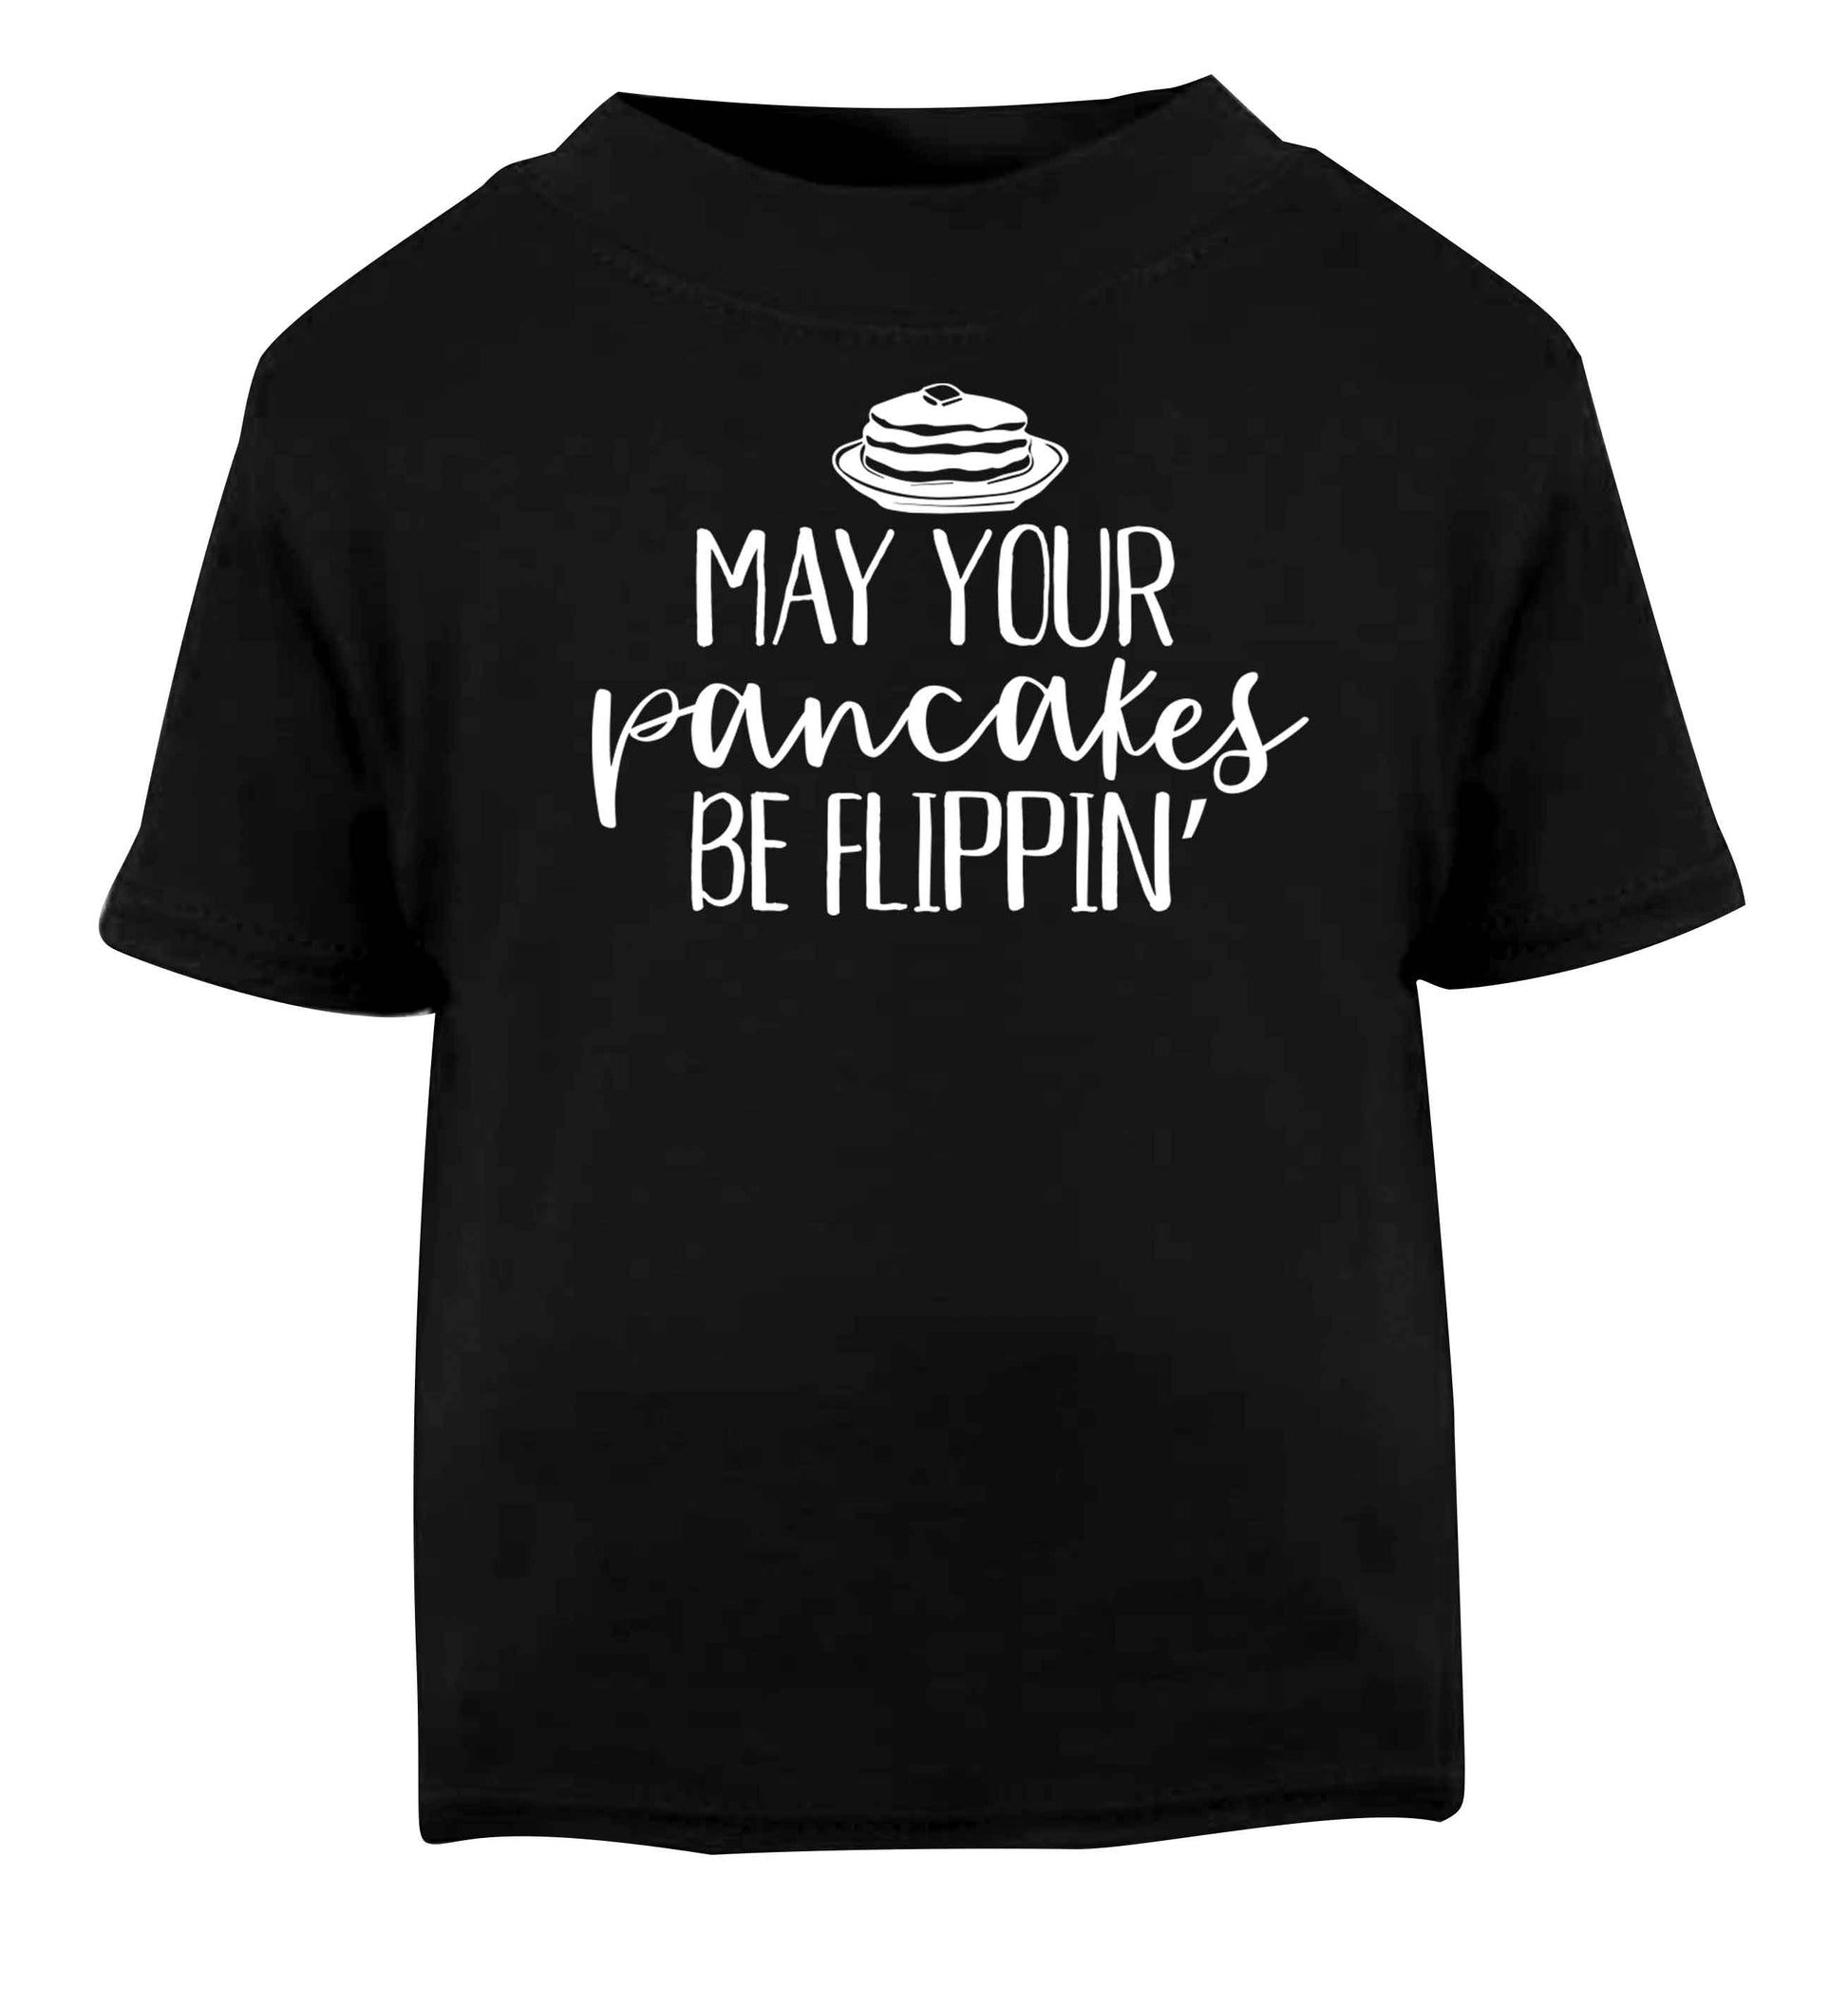 May your pancakes be flippin' Black baby toddler Tshirt 2 years